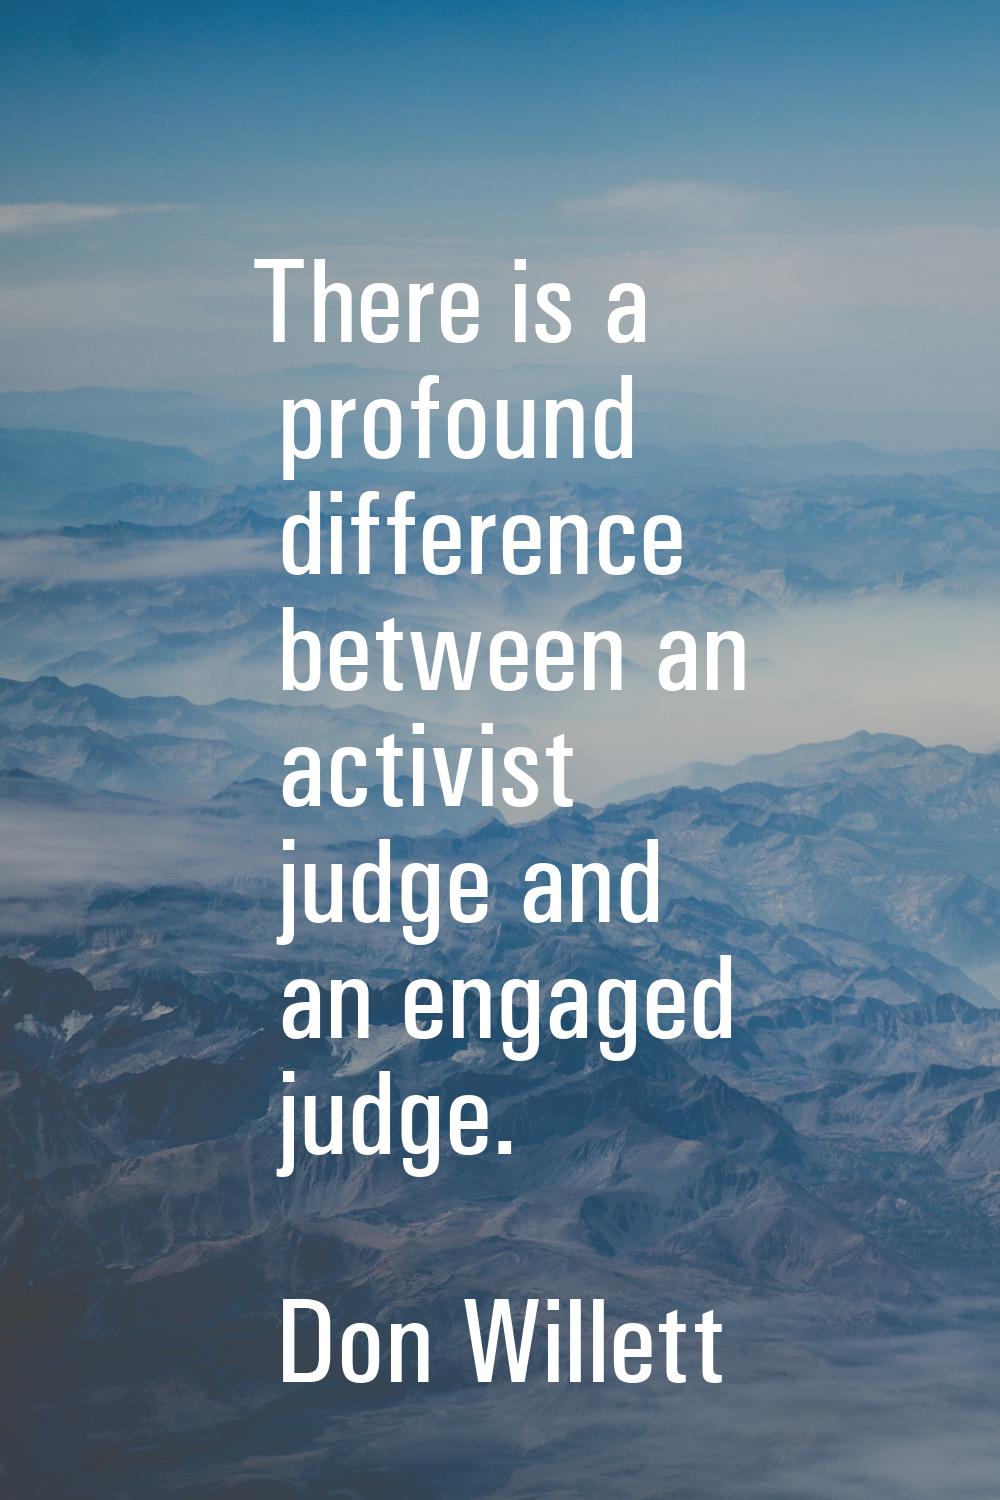 There is a profound difference between an activist judge and an engaged judge.